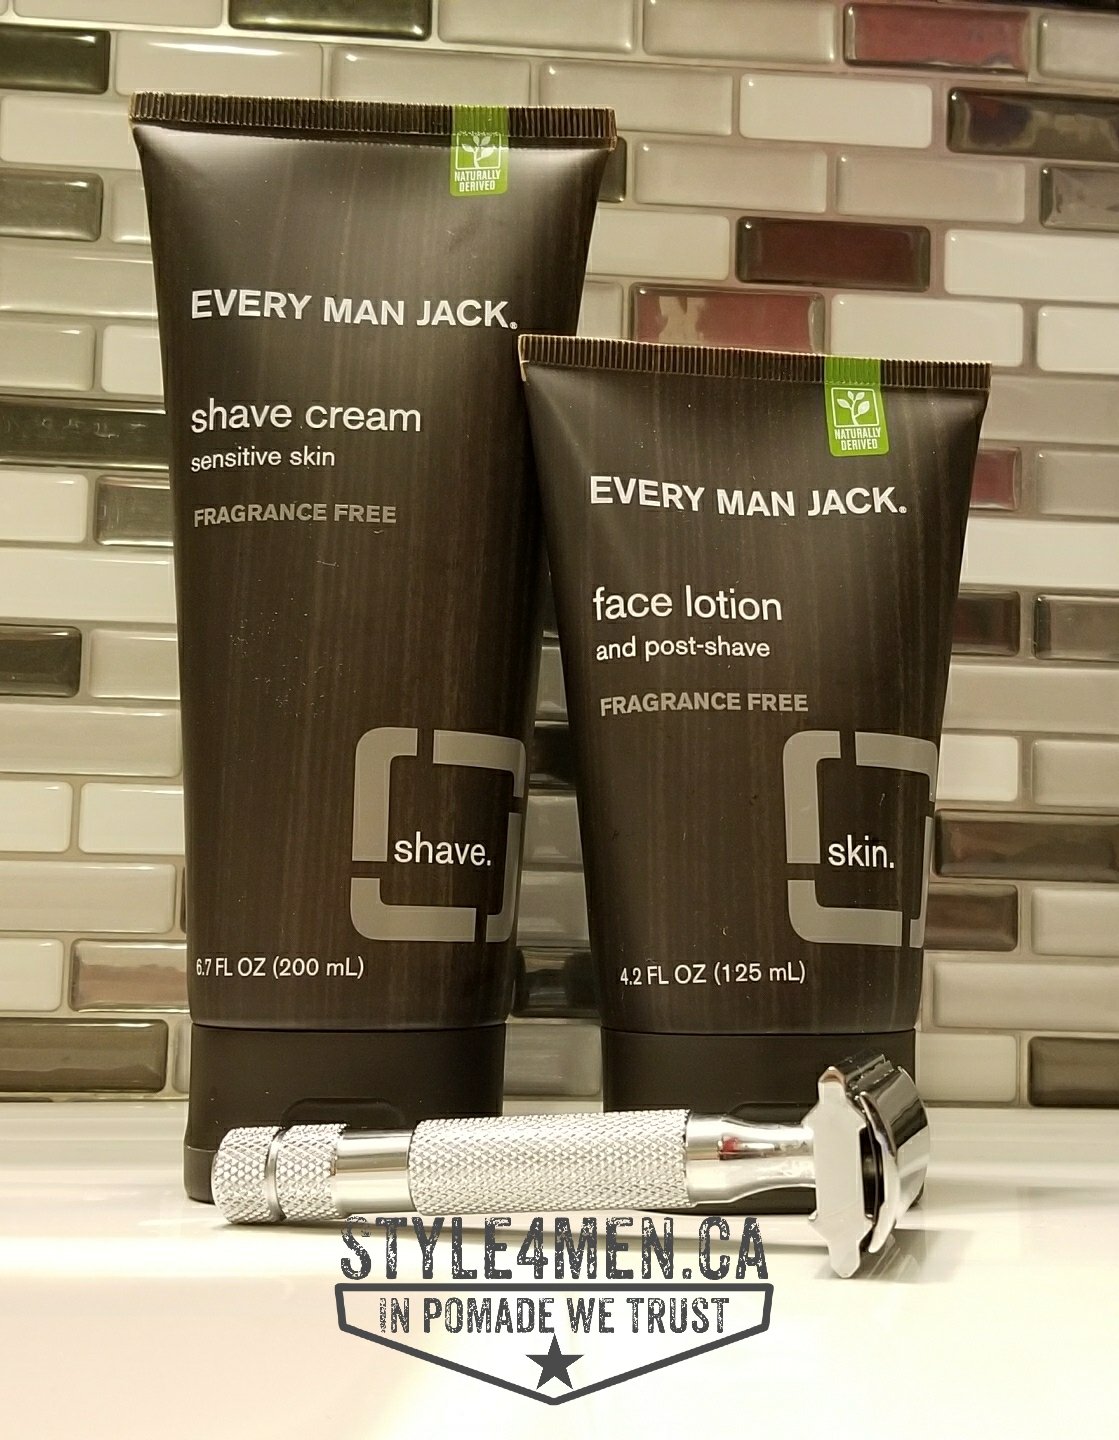 Exploring Every Man Jack products – Part 2 – Shaving